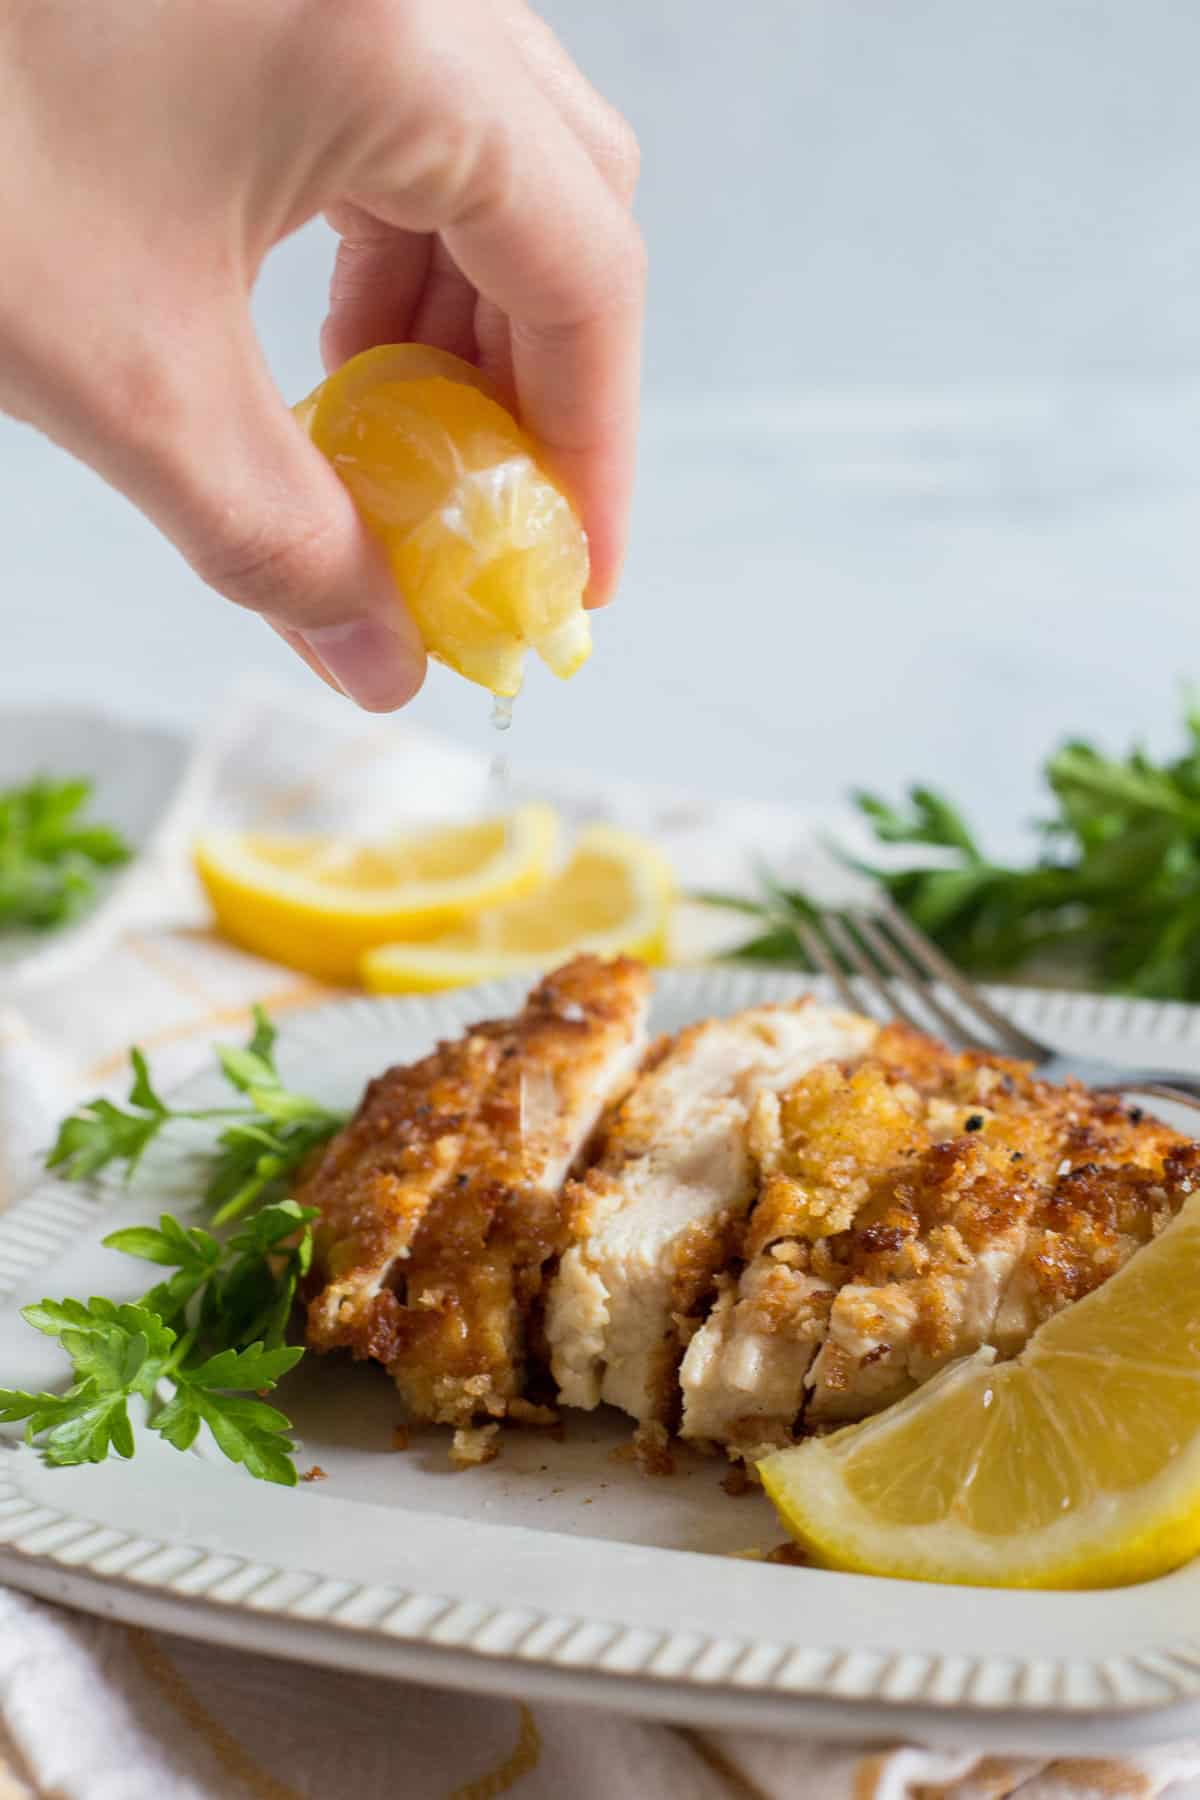 Squeezing a lemon on the chicken schnitzel.